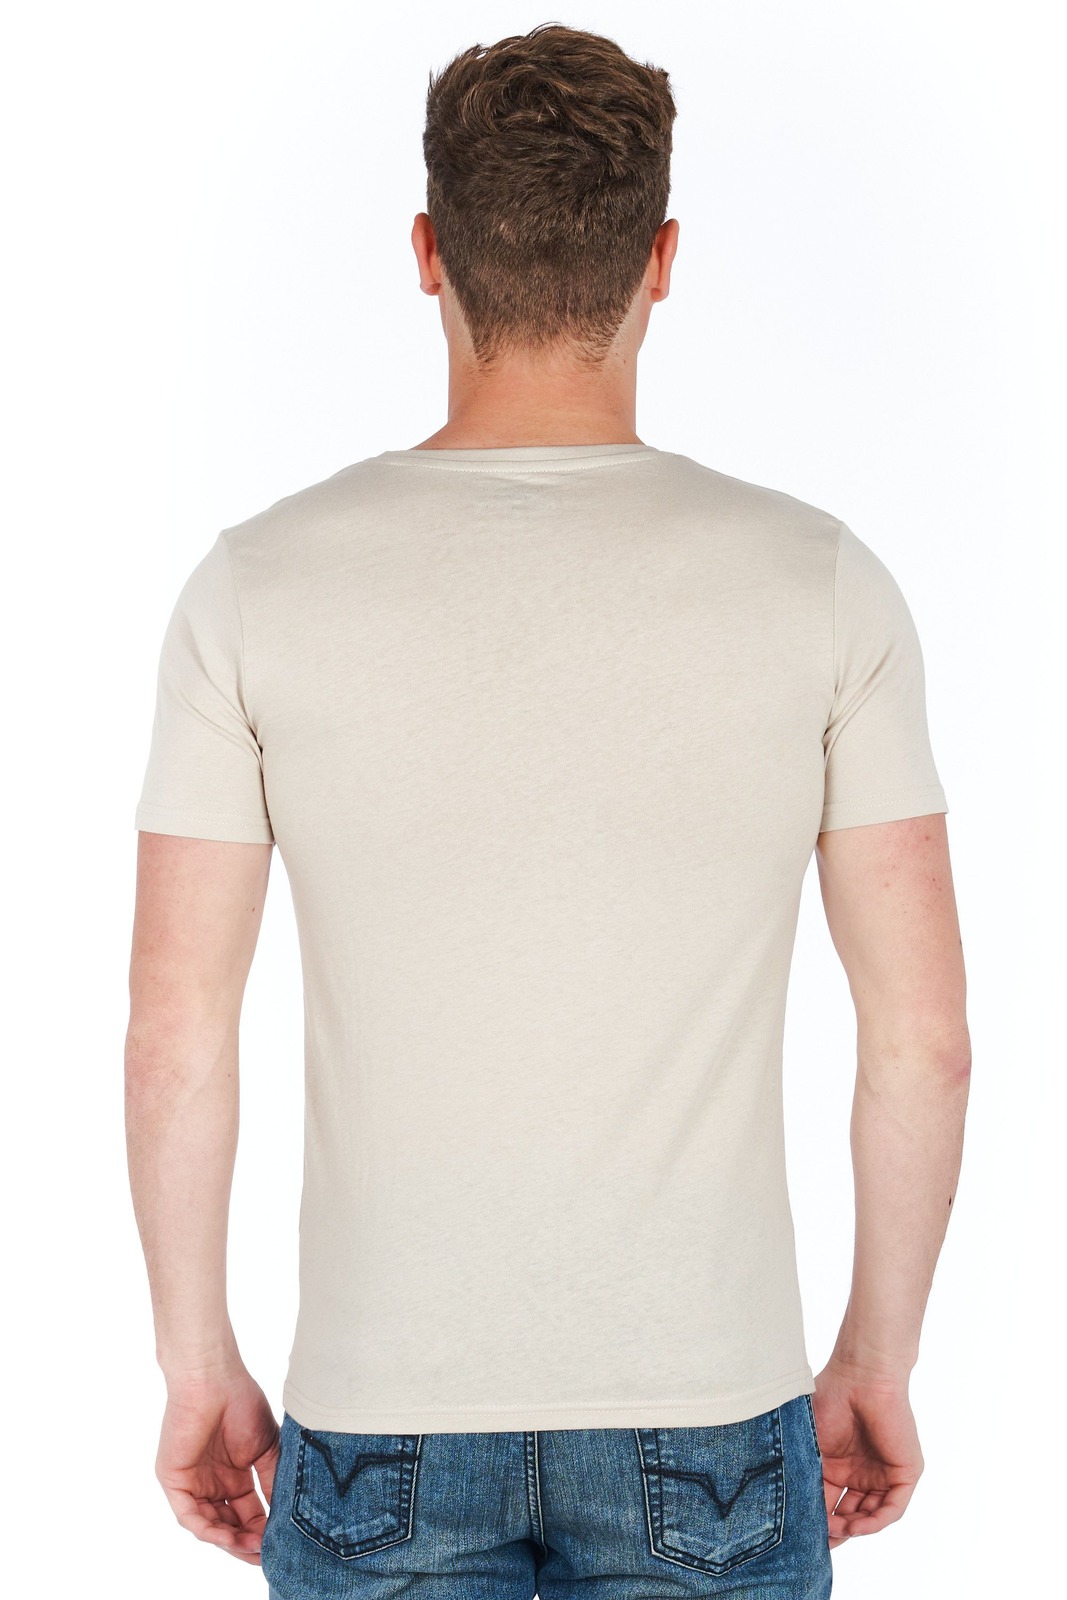 Jeckerson Grey T-shirts for Men - CLASSIC